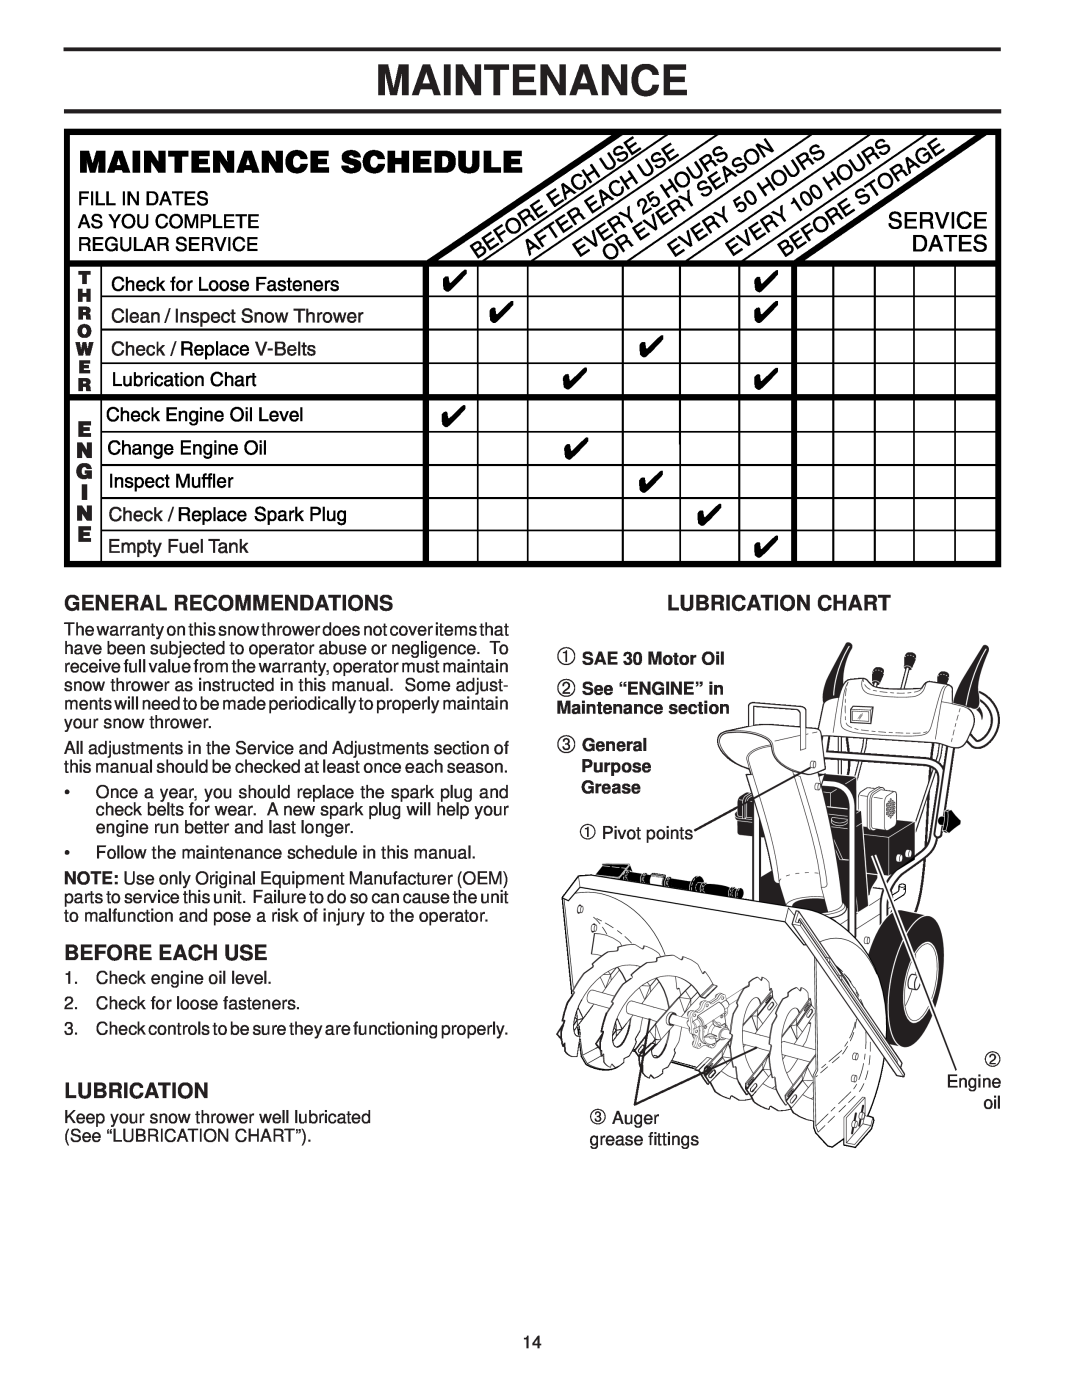 Husqvarna 96193002300 manual Maintenance, General Recommendations, Before Each Use, Lubrication Chart 